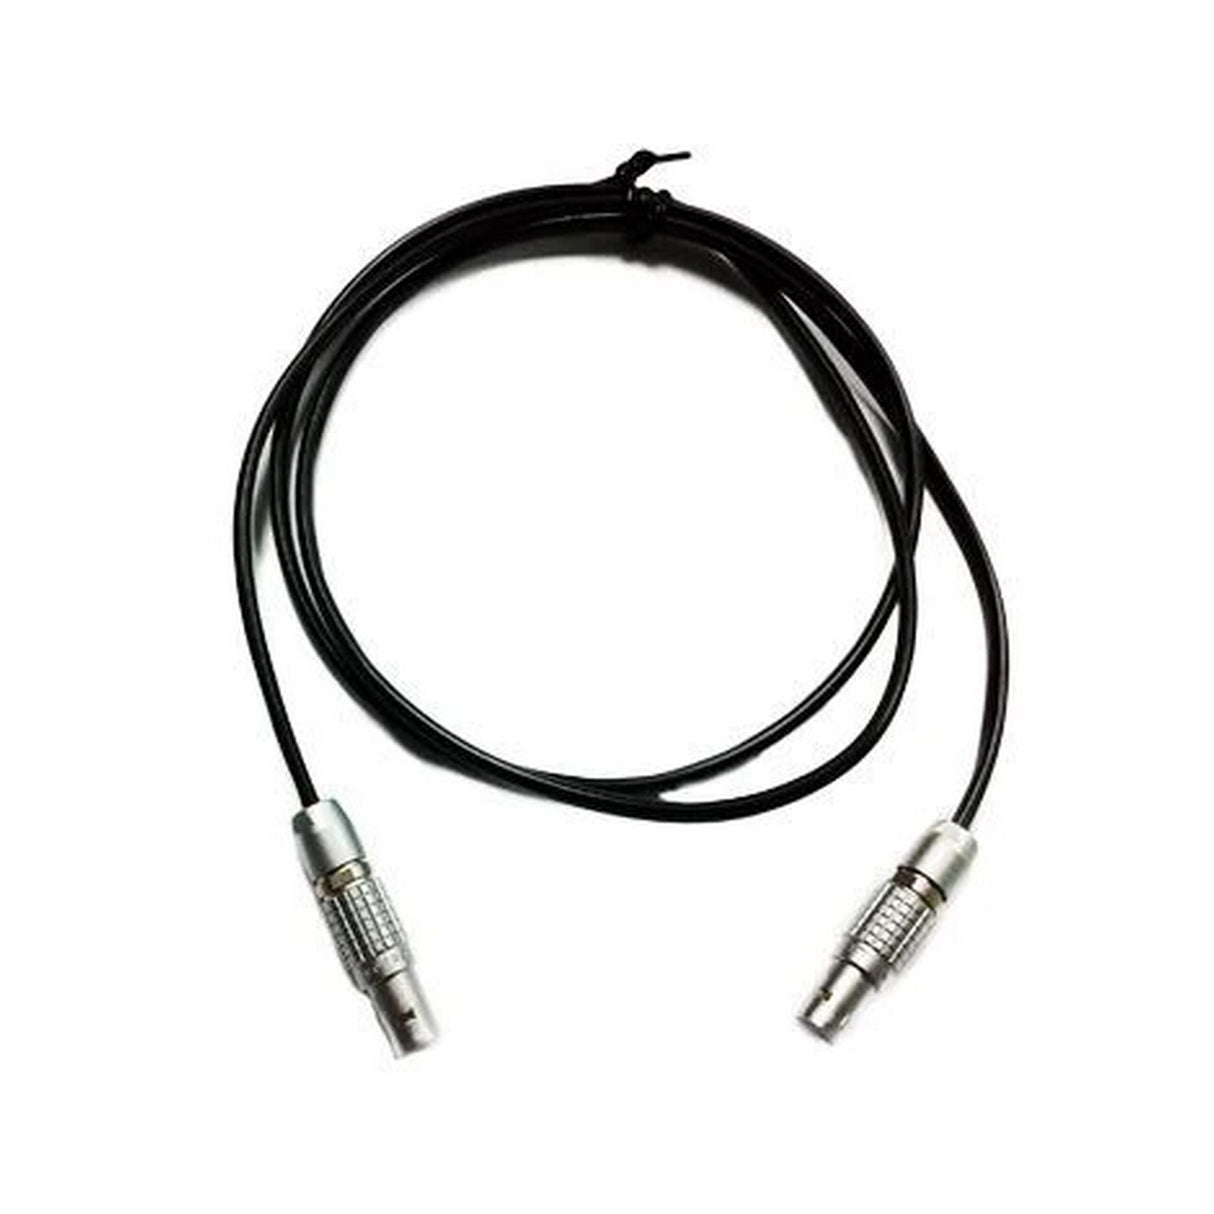 SmallHD CBL-PWR-2PIN-2PIN-18 2-Pin to 2-Pin Power Cable, 18-Inch